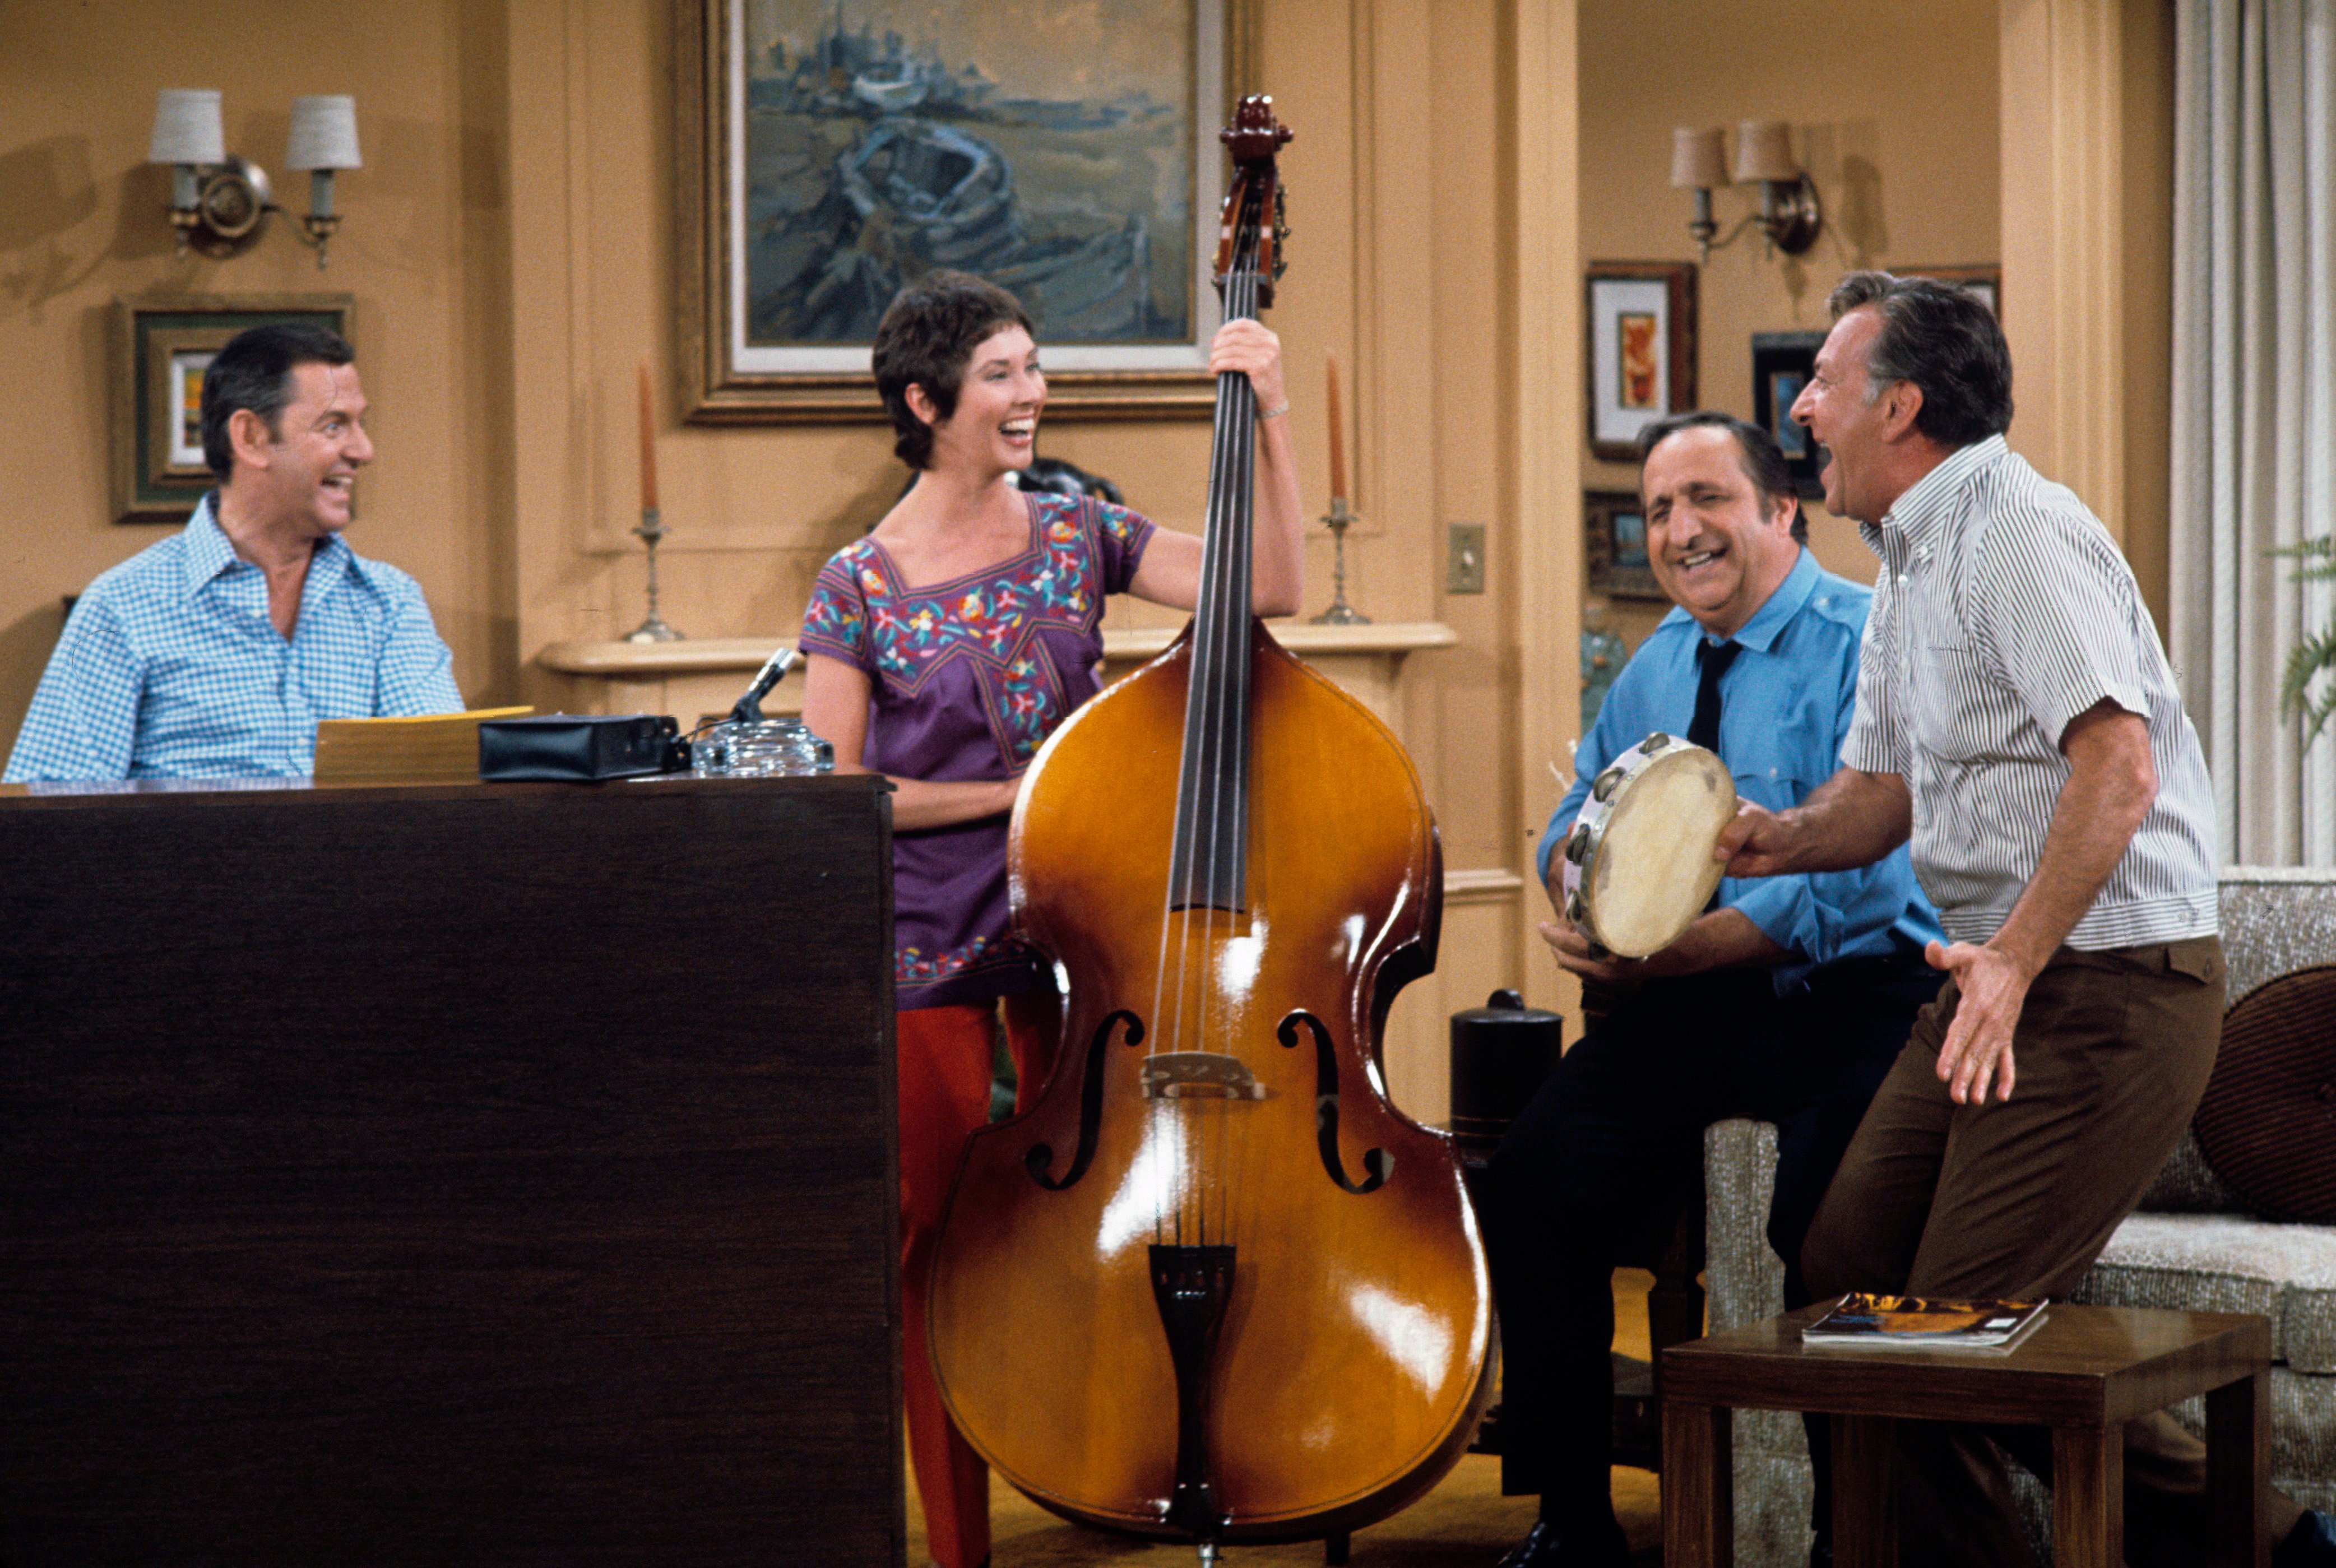 Actor Elinor Donahue plays a stand-up bass in a scene from the 1970s sitcom 'The Odd Couple.' Left to right as well are actors Tony Randall, Al Molinaro, and Jack Klugman.